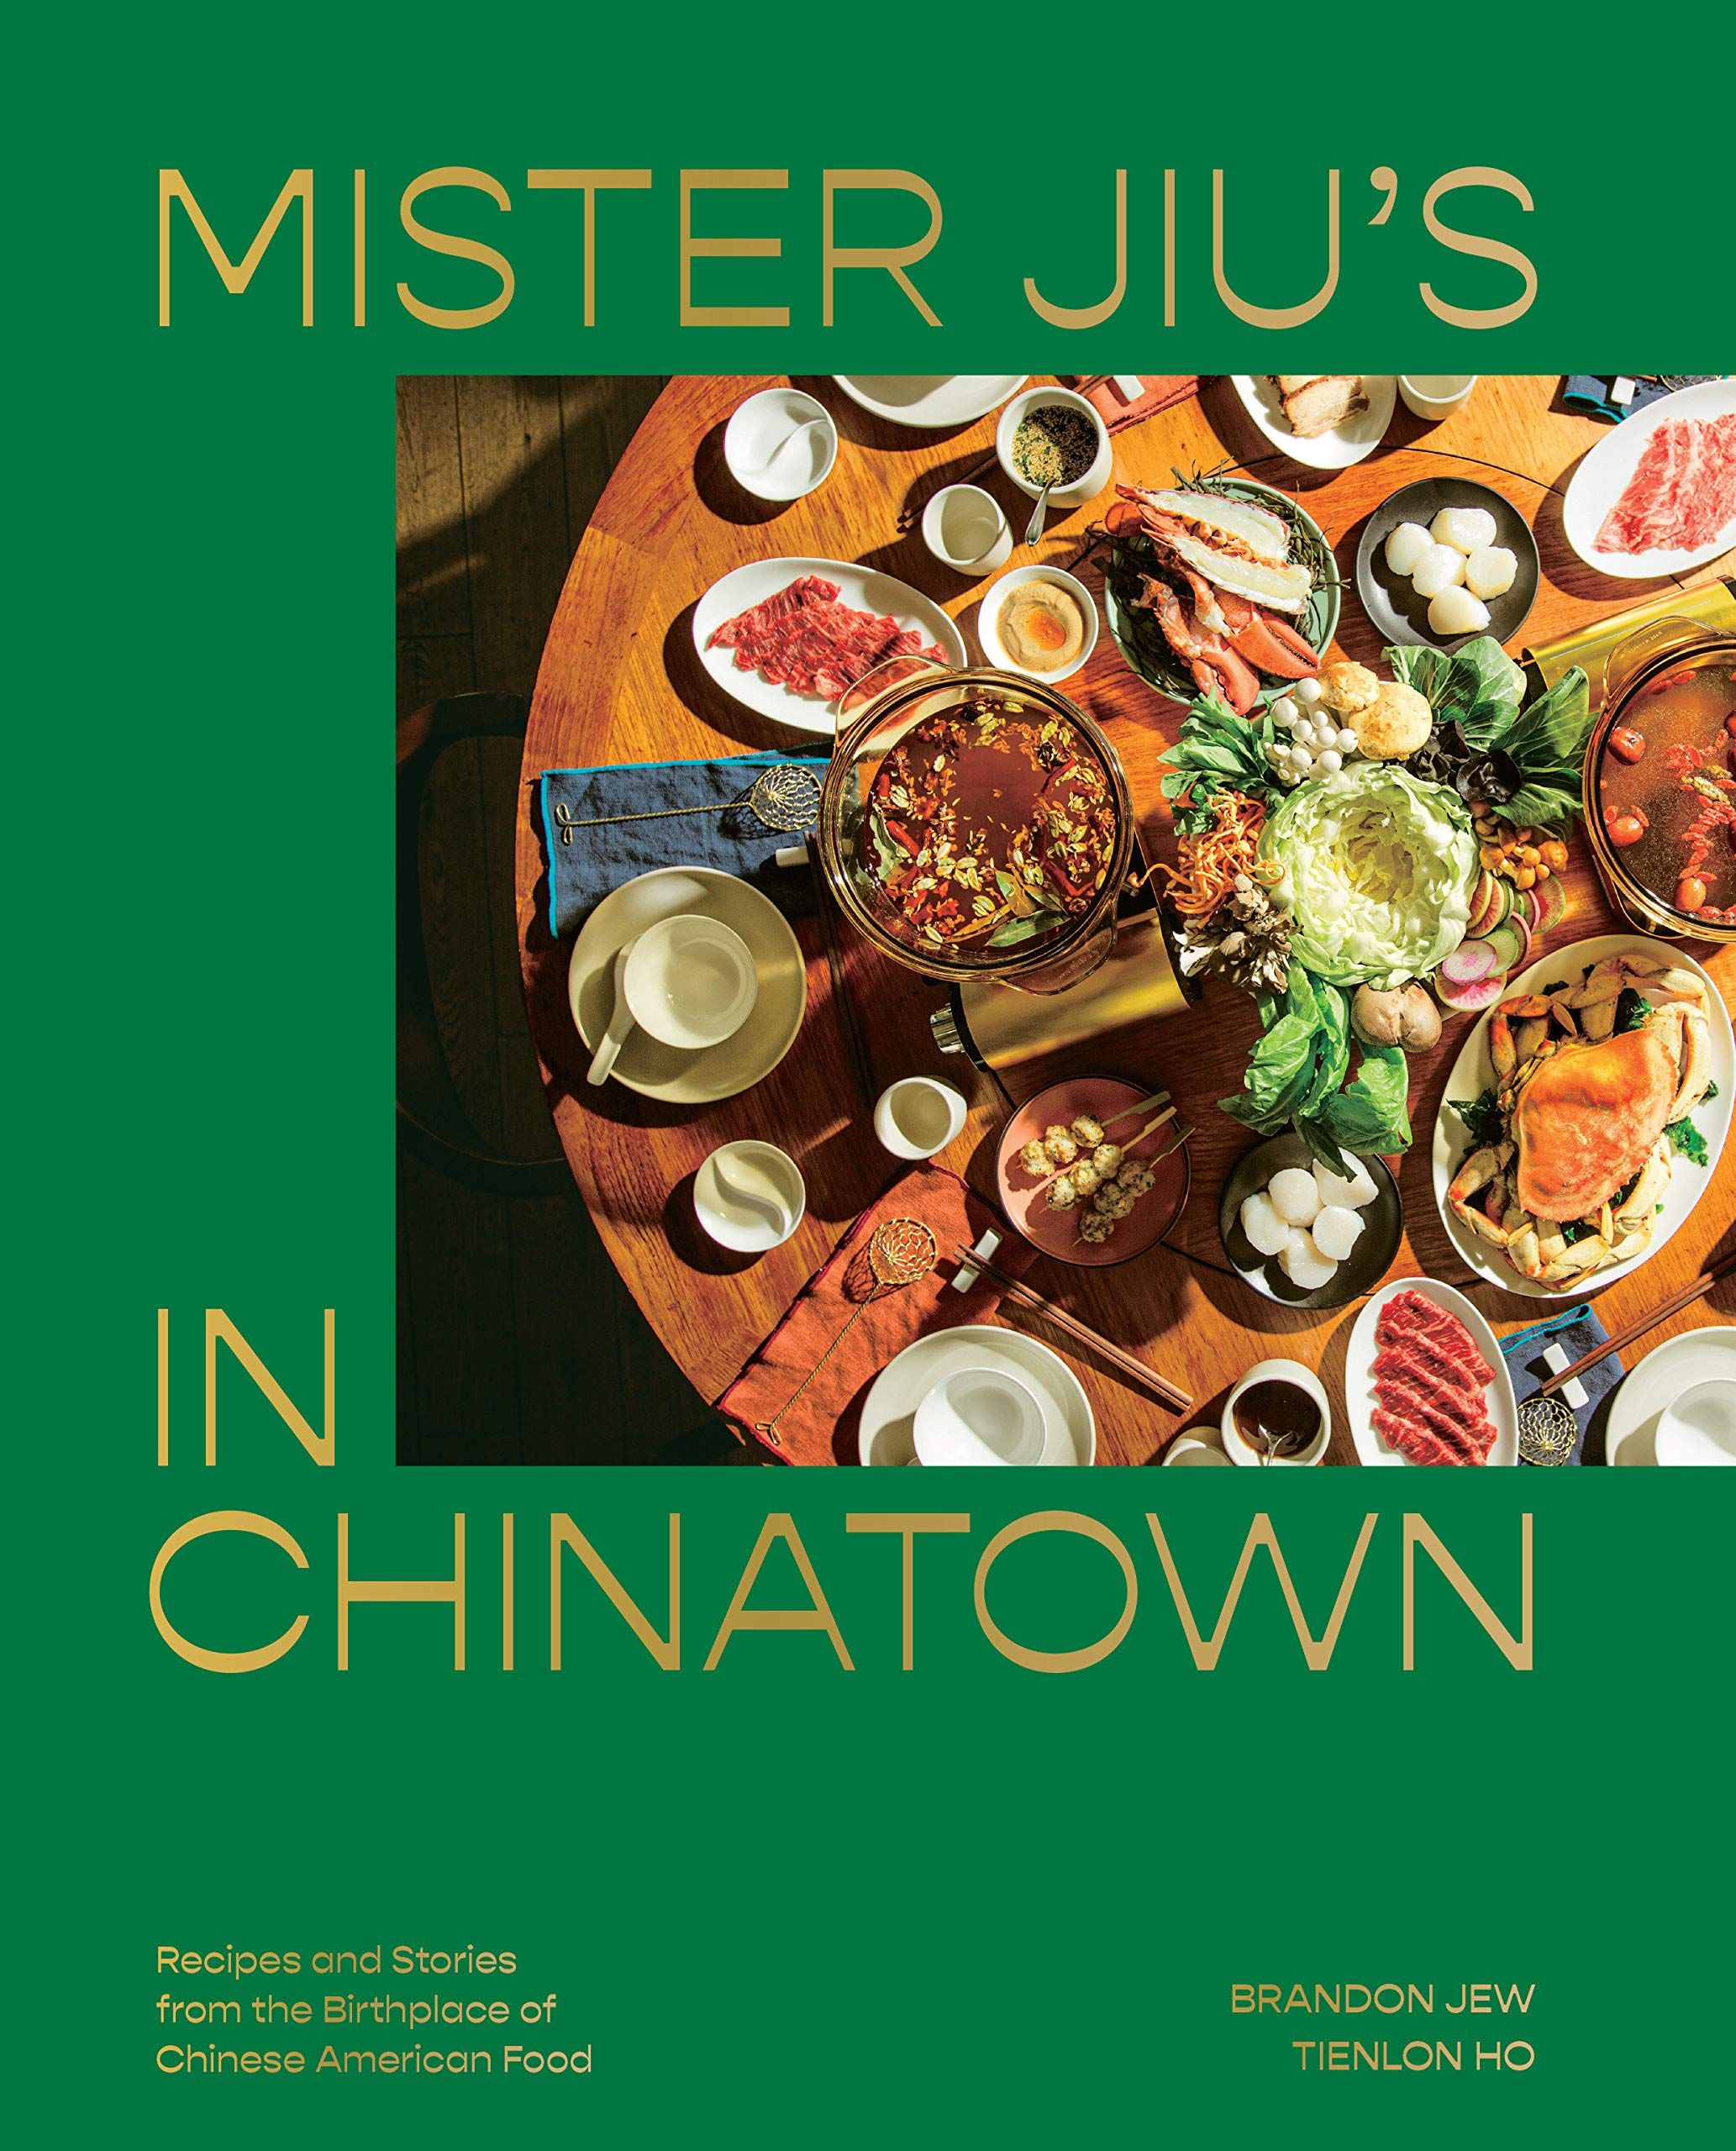 Mister Jiu's in Chinatown by Brandon Jew and Tienlo Ho cover